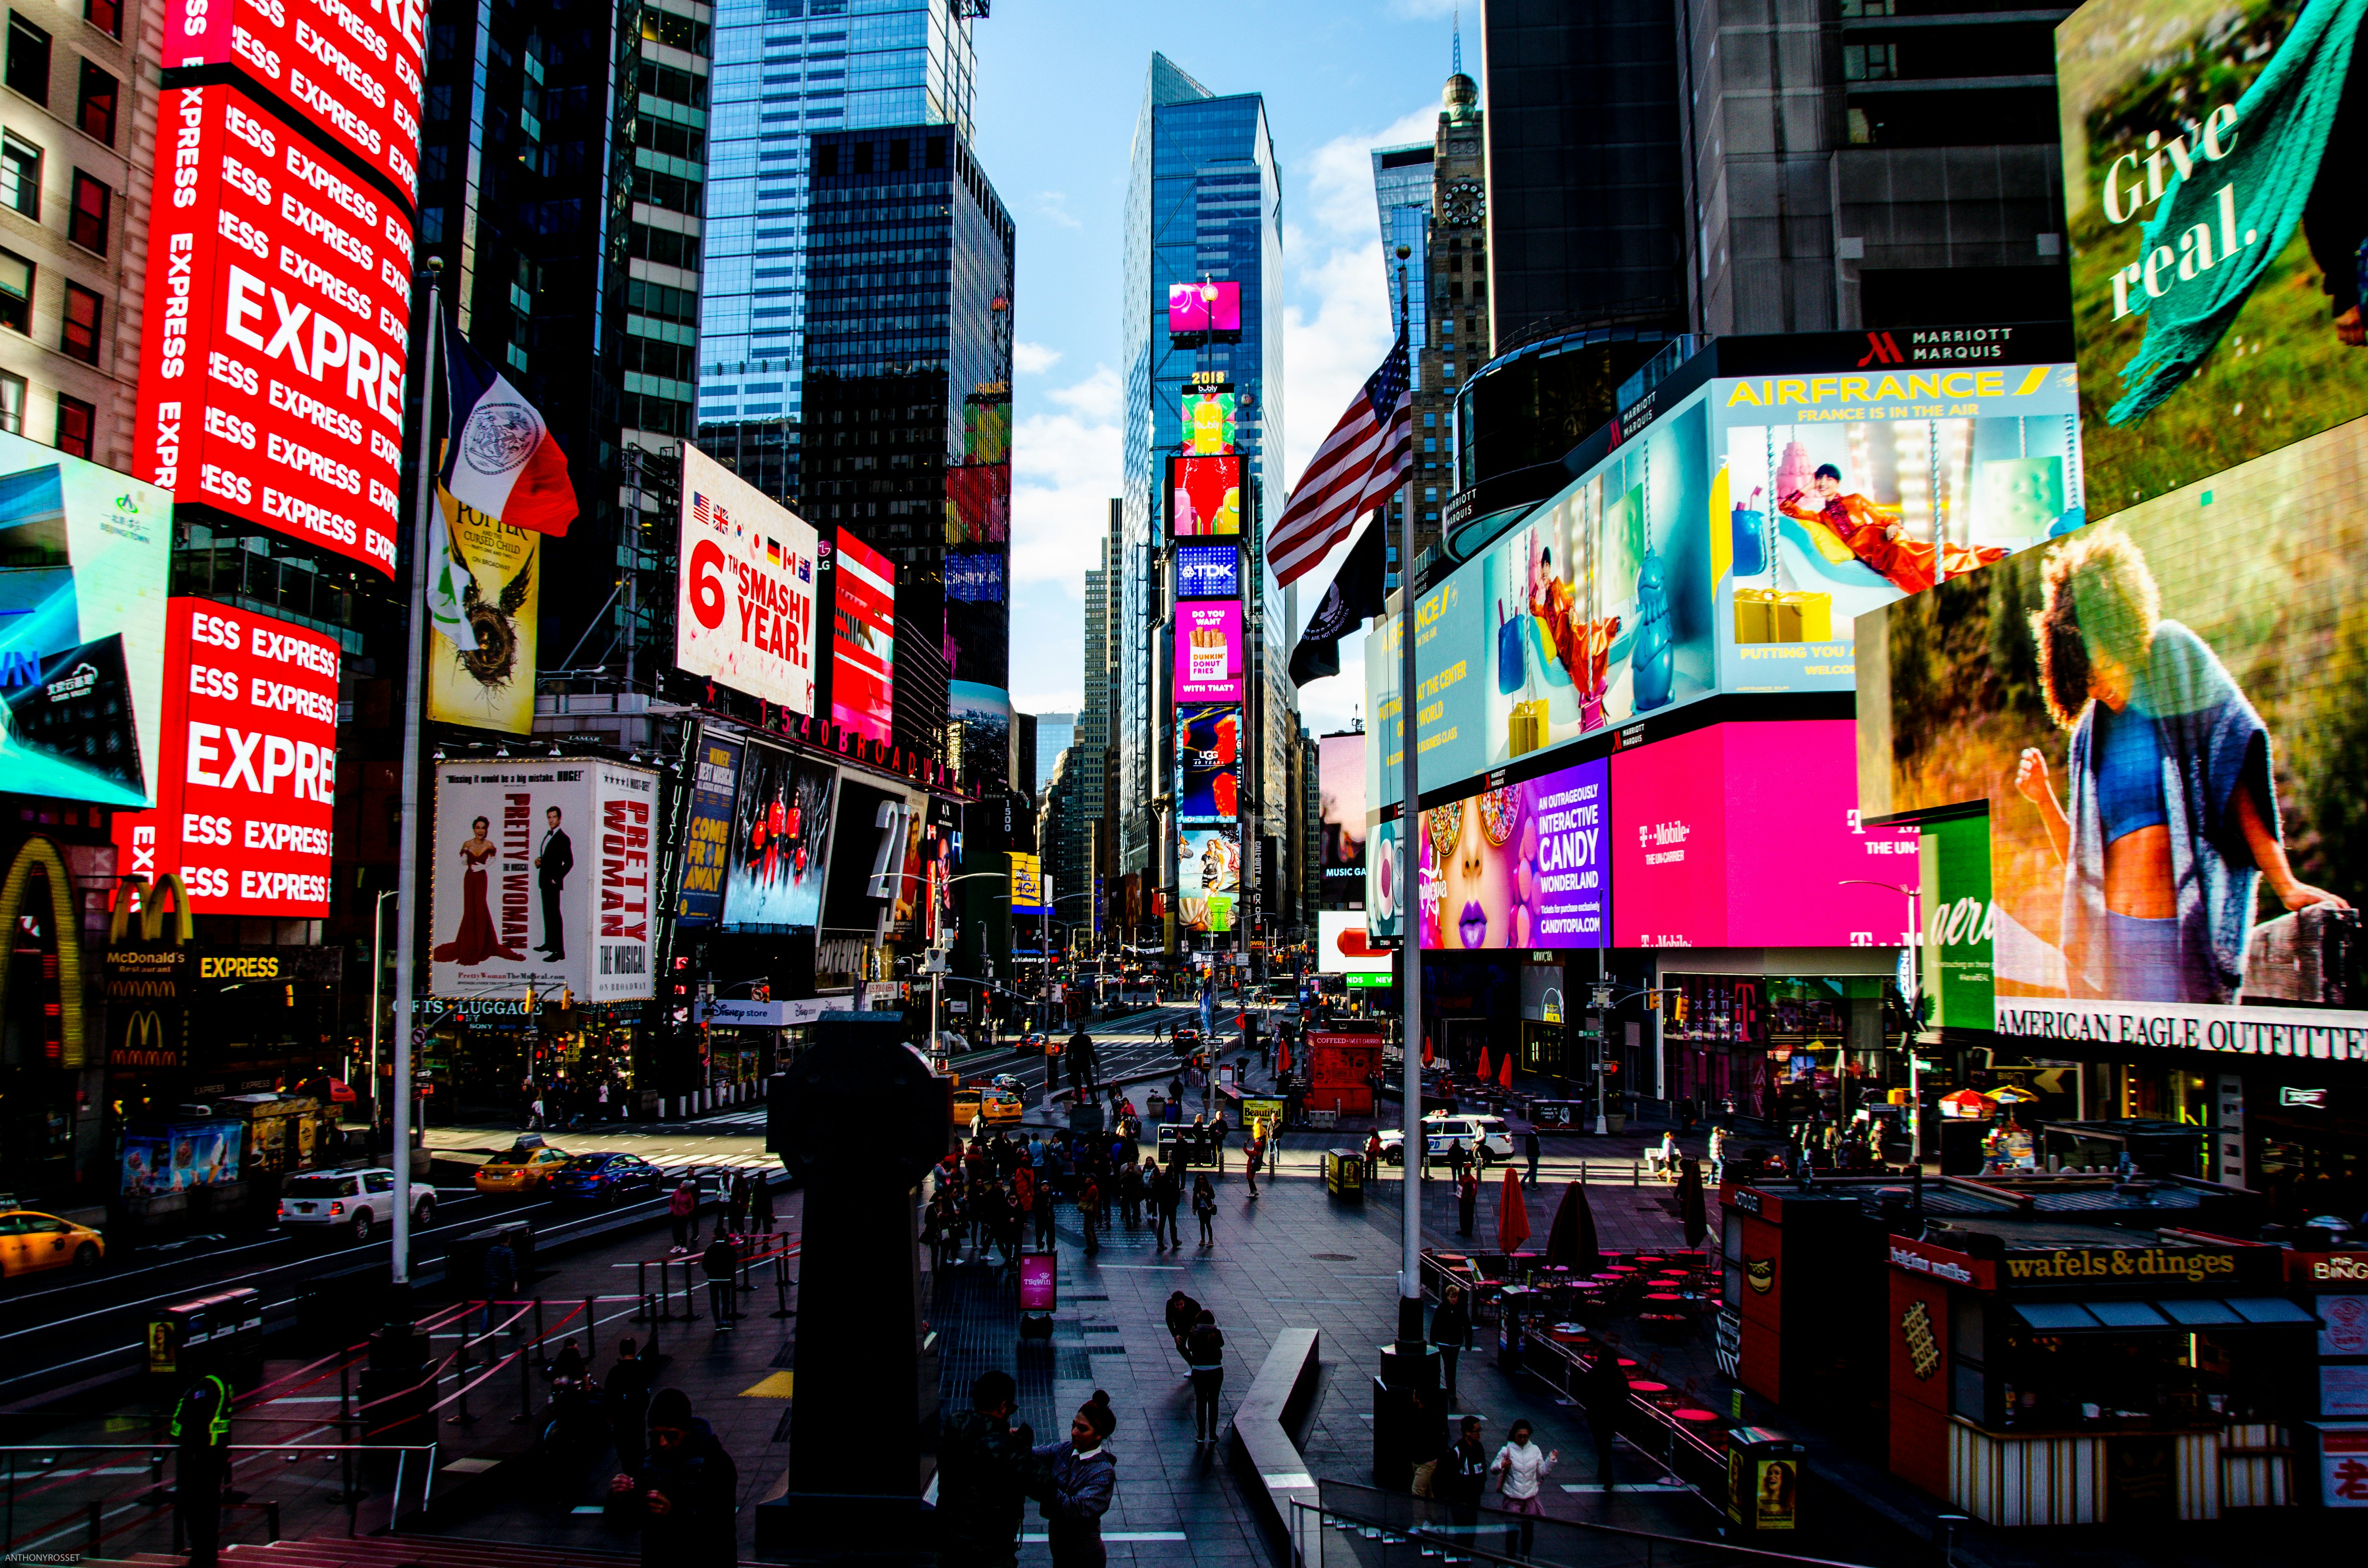 photo of advertisements on billboards in Times Square in New York